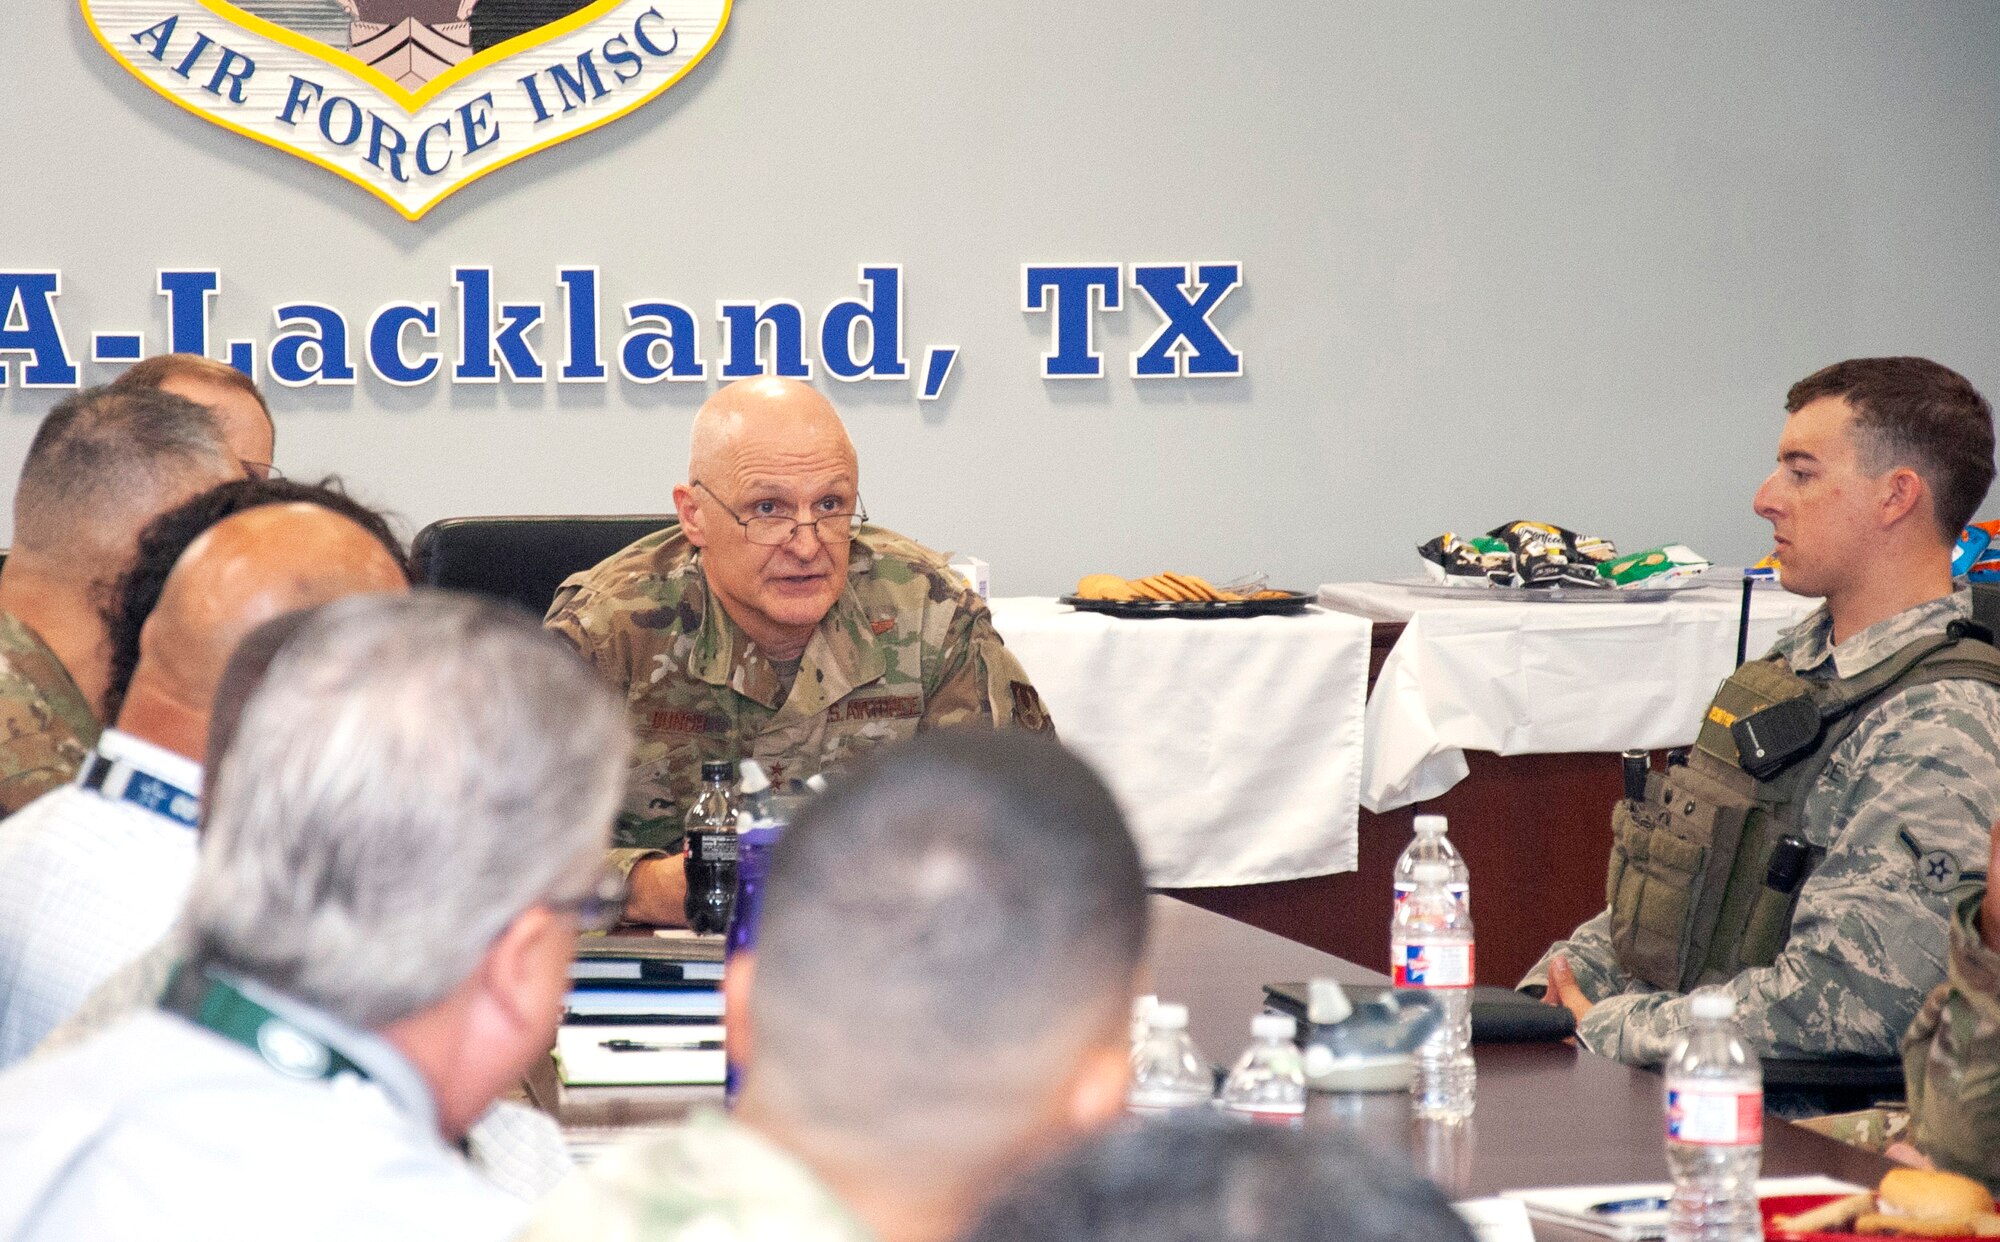 During his visit to Air Force Materiel Command units in San Antonio, AFMC Commander Gen. Arnold W. Bunch, Jr., held a mentoring lunch session with members of the command at Air Force Installation and Mission Support Center headquarters. (U.S. Air Force photo by Armando Perez)